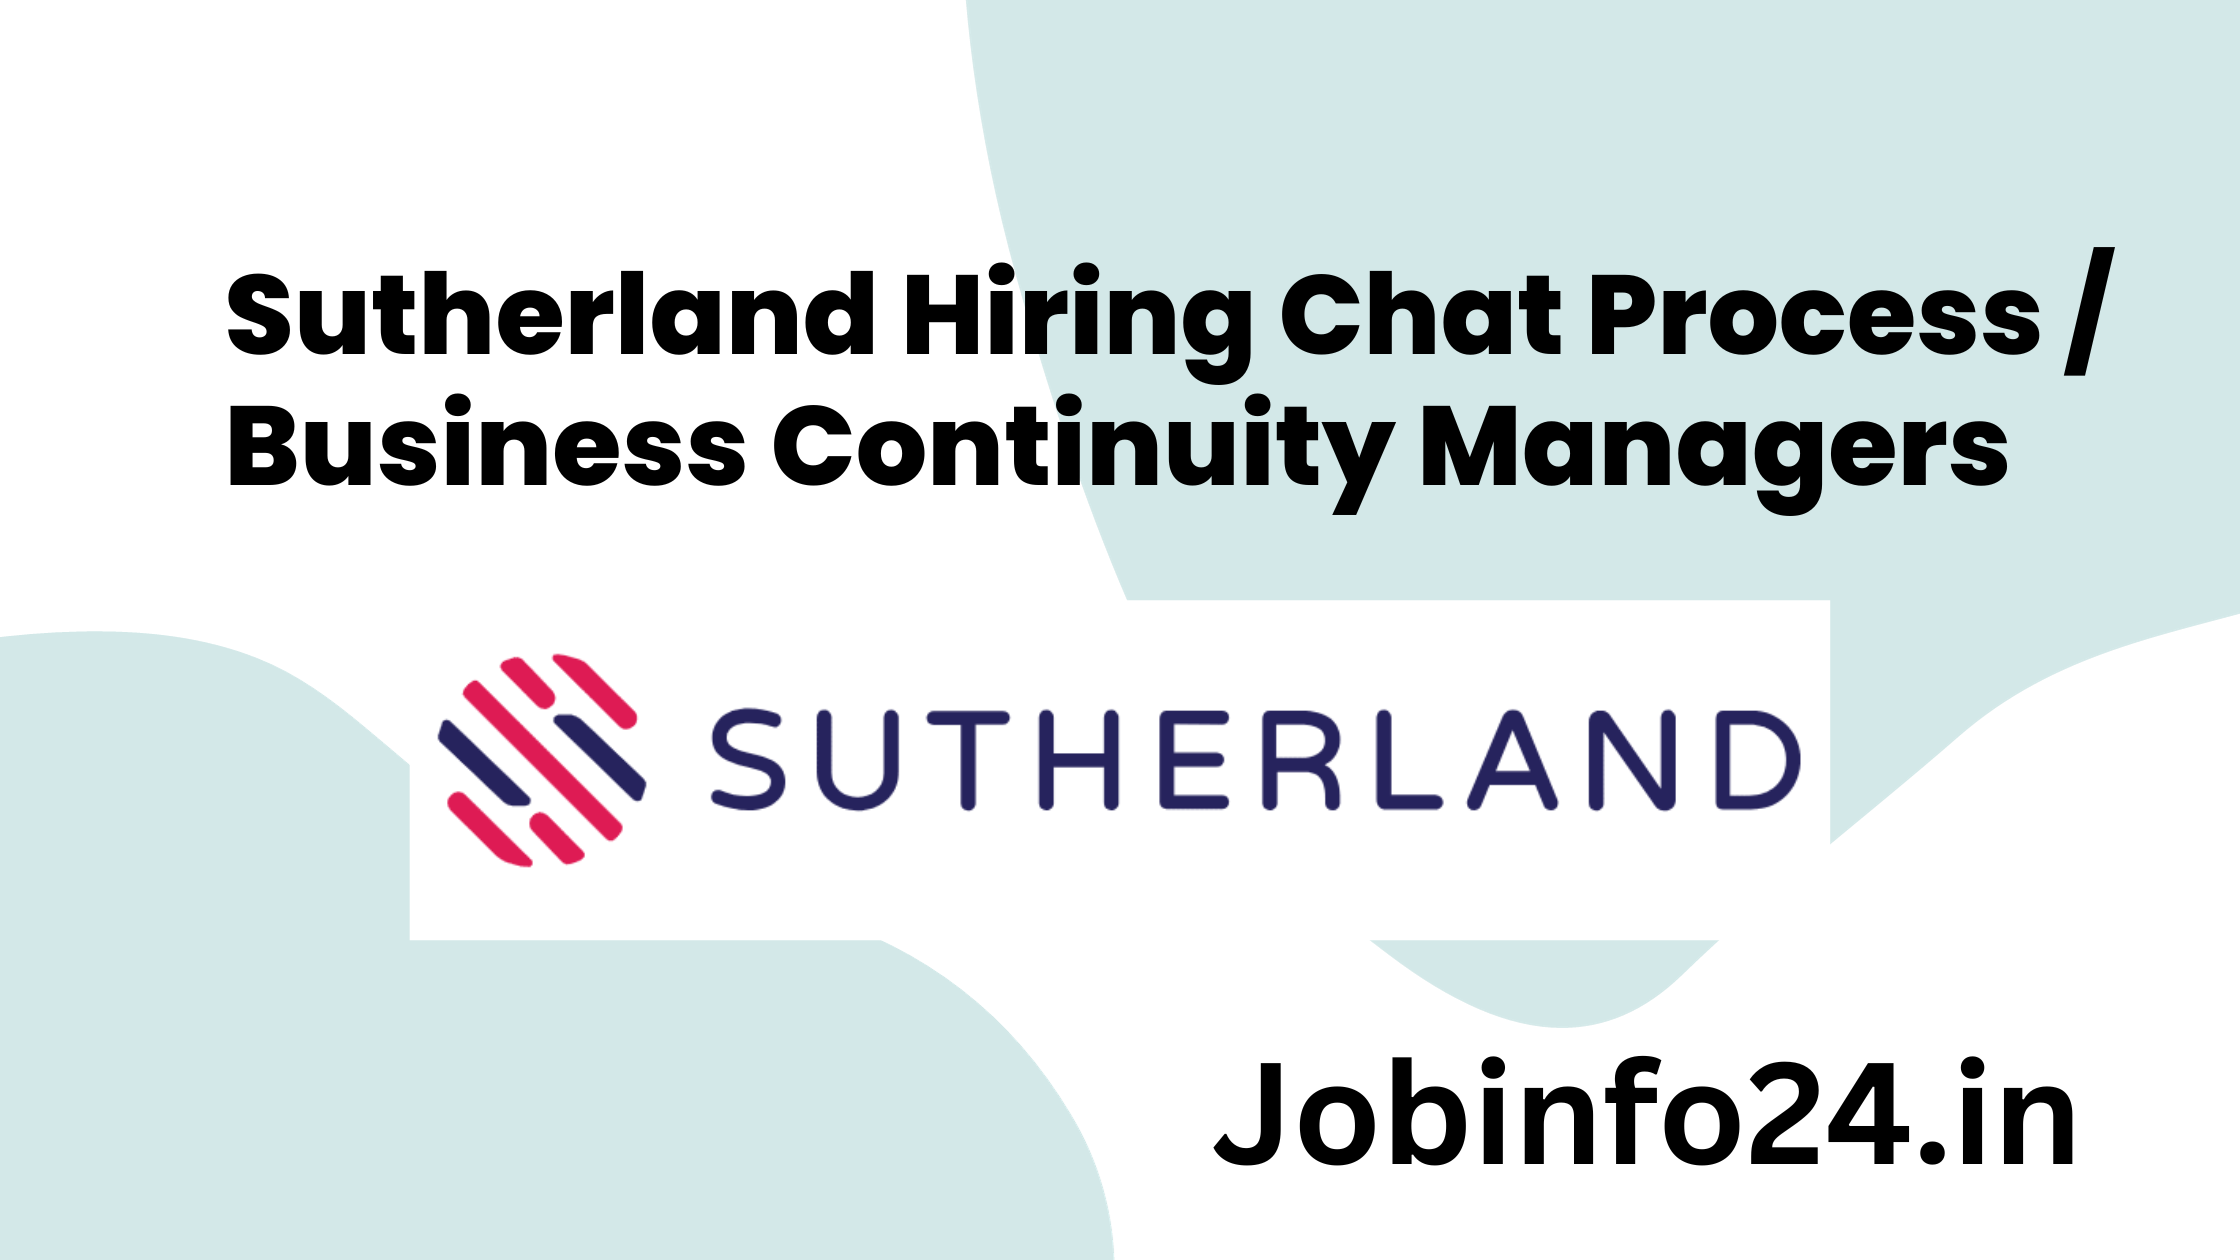 Sutherland Hiring Chat Process / Business Continuity Managers